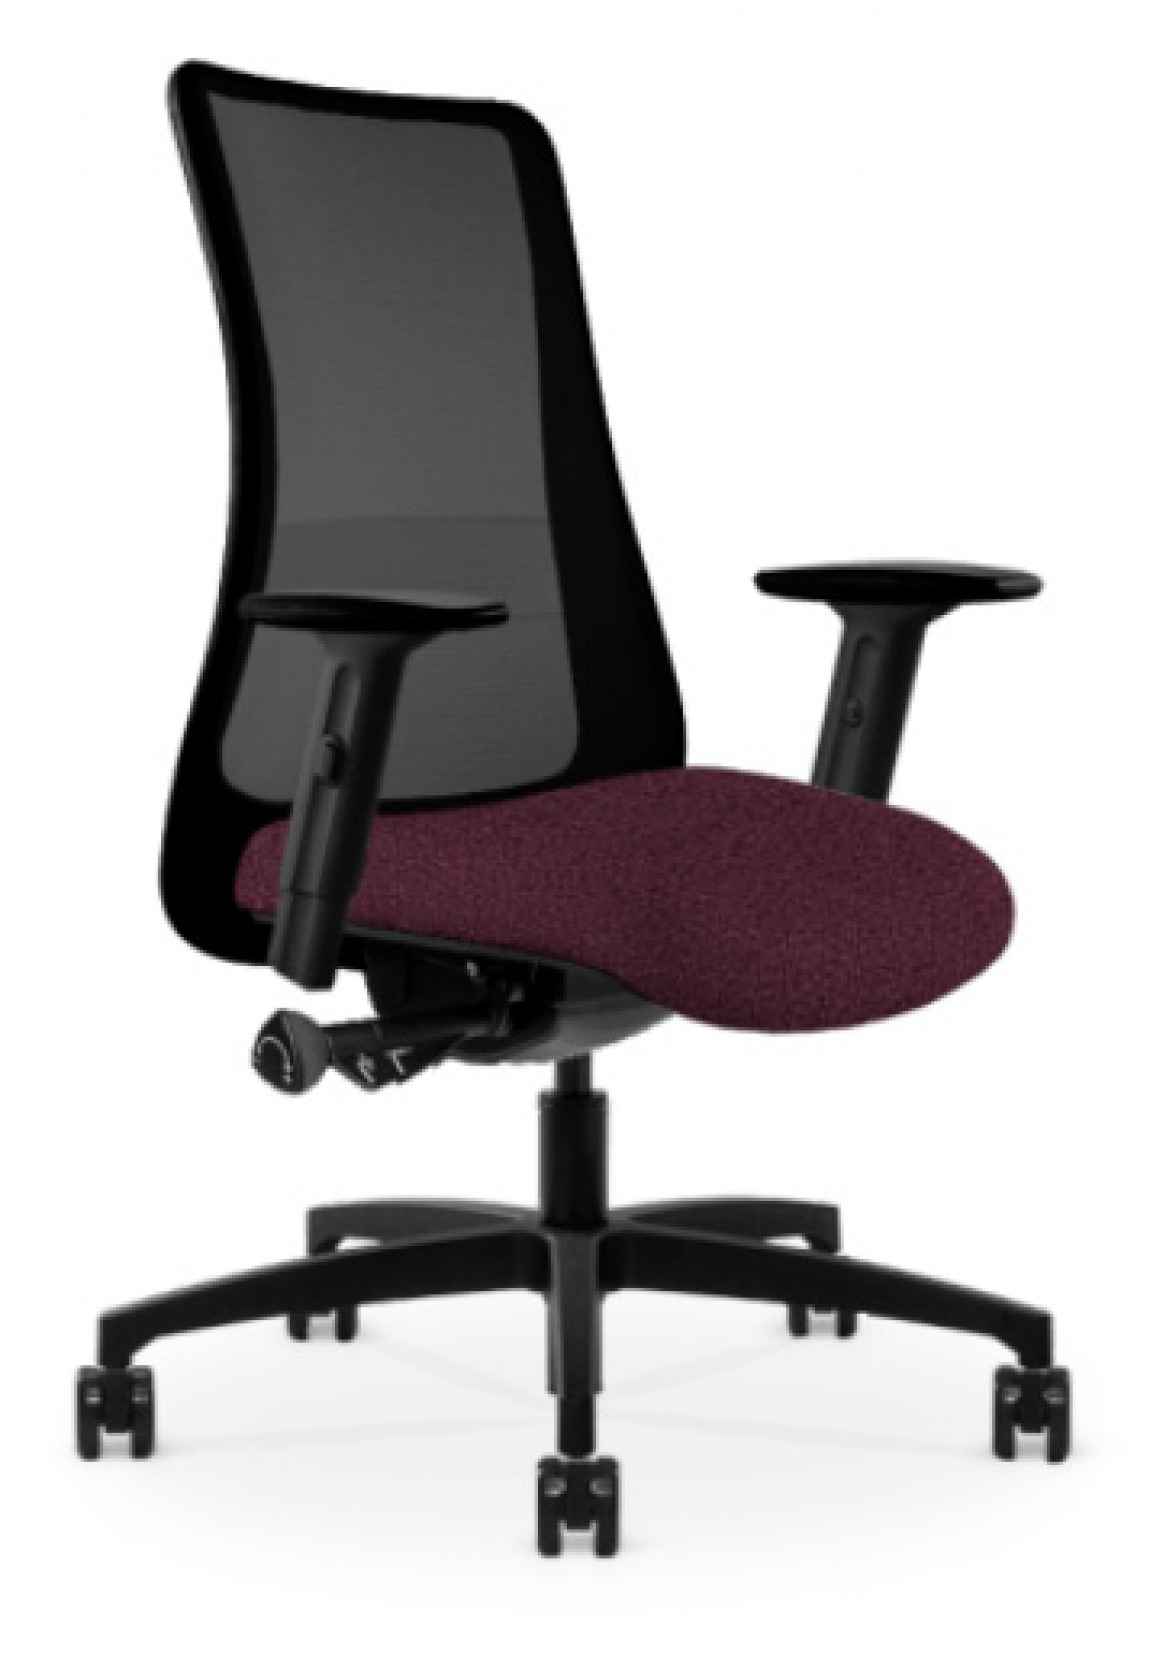 Black Copper Mesh Antimicrobial Office Chair w/ Grape Seat